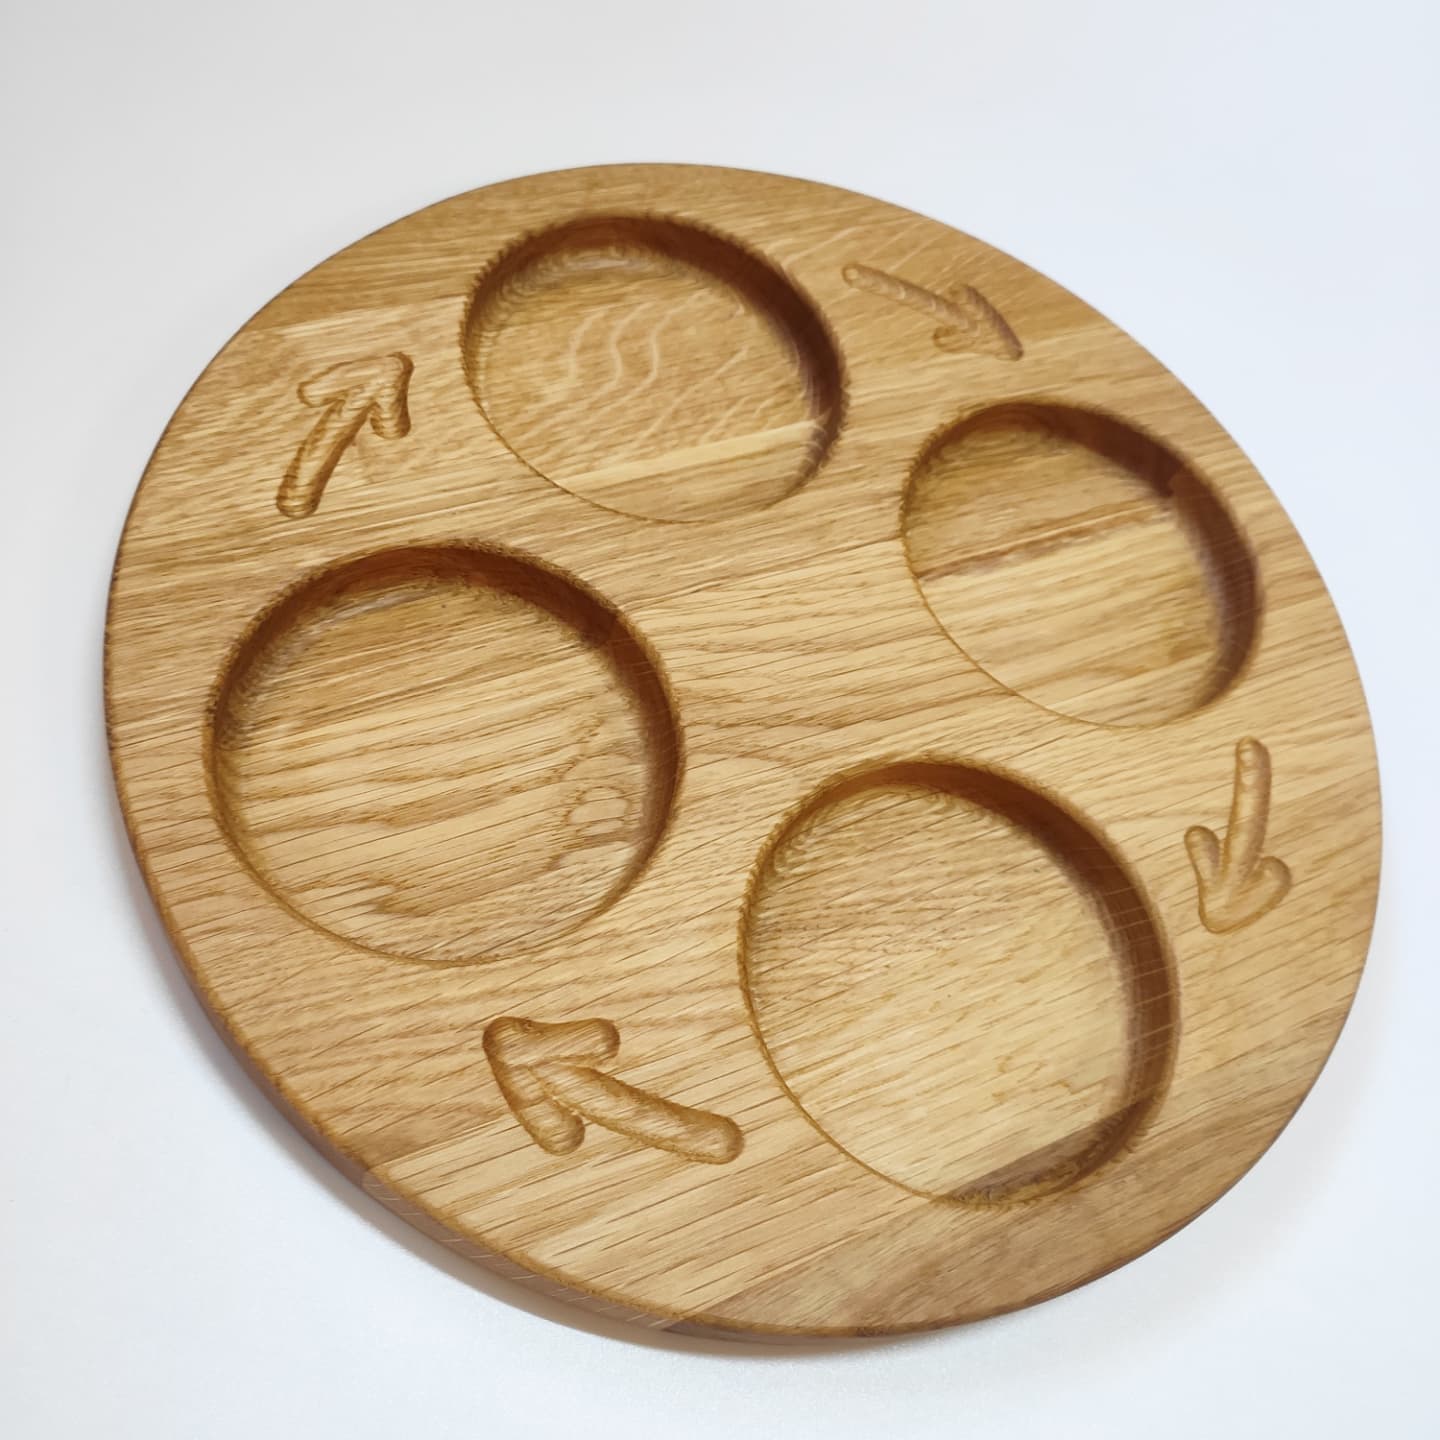 Montessori life cycle reversible tray, with 4 sections on 1 side and with 5 sections on the back side